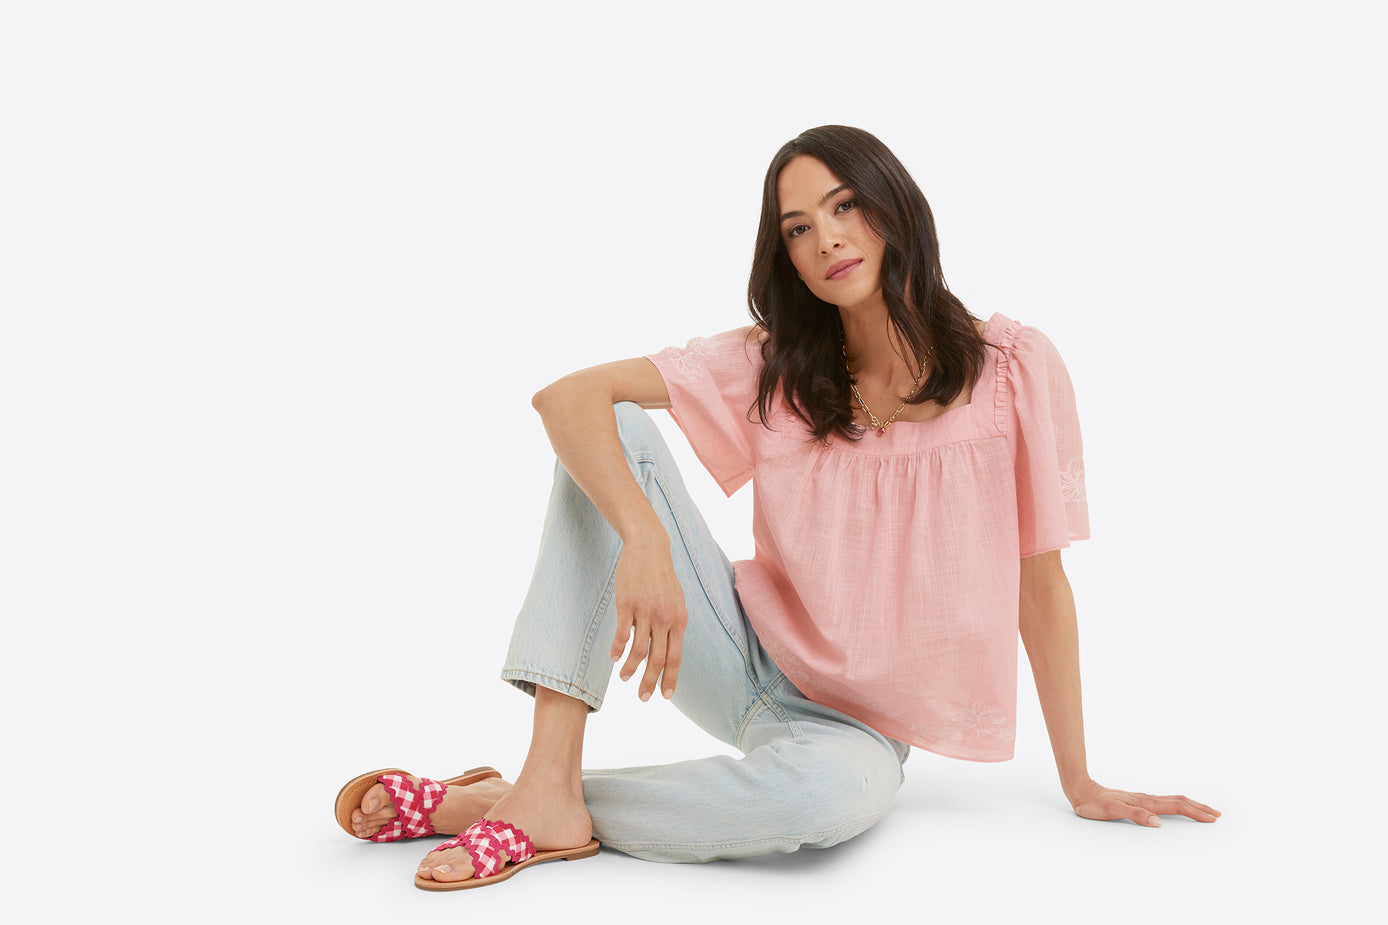 Maren Top in Pink Embroidered Floral